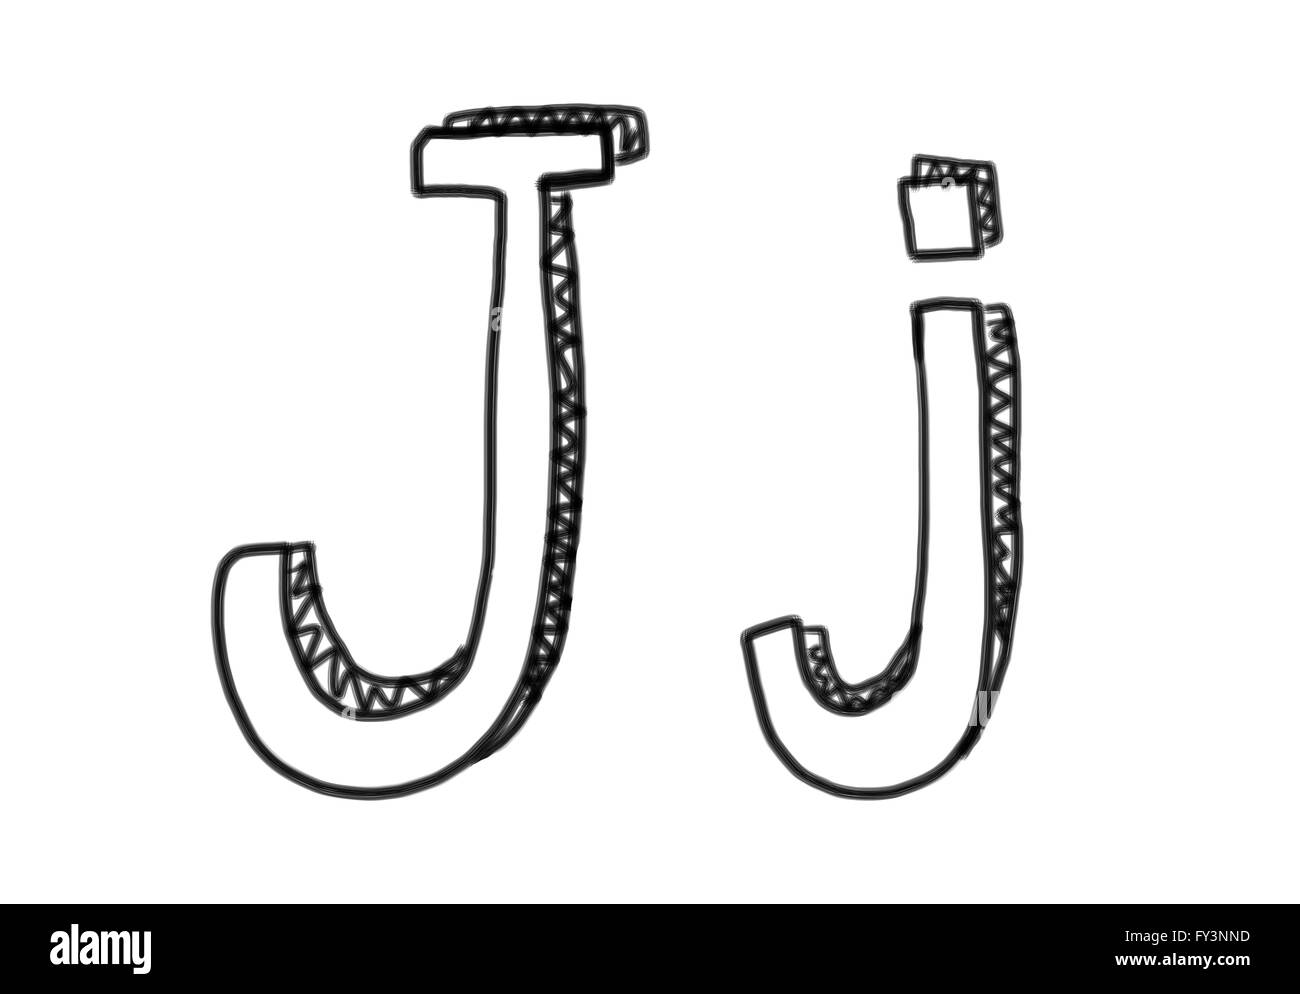 New drawing Character J of alphabet logo icon in design elements. Stock Photo